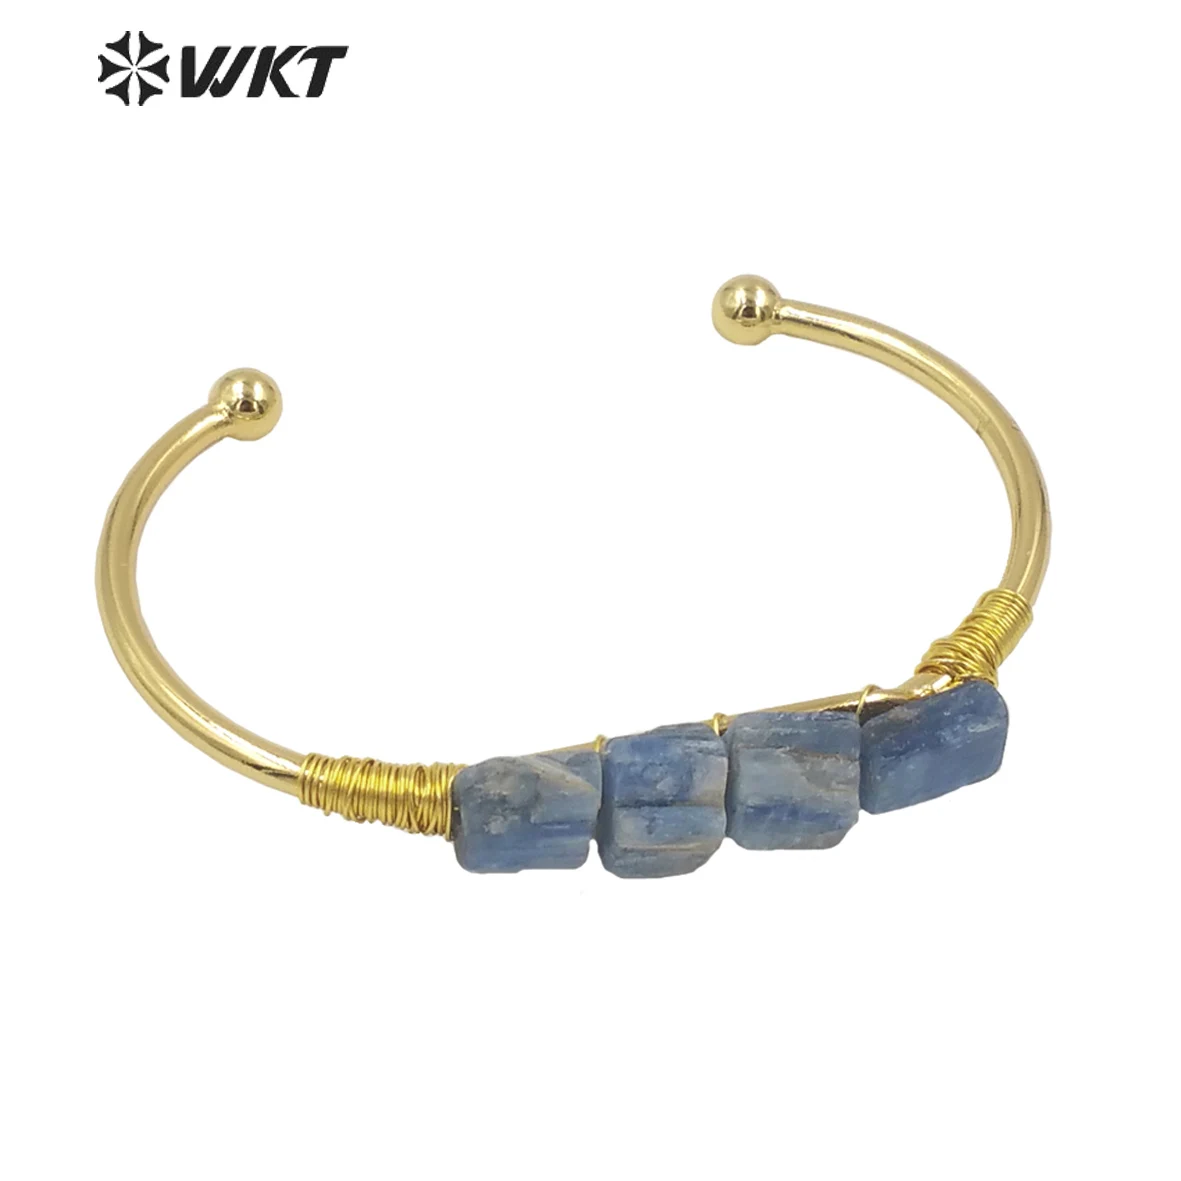 

WT-B596 WKT Natural Stone Blue Kyanite Opening Adjustable Gold Bangle Beautiful Fine Jewelry Gift For Party